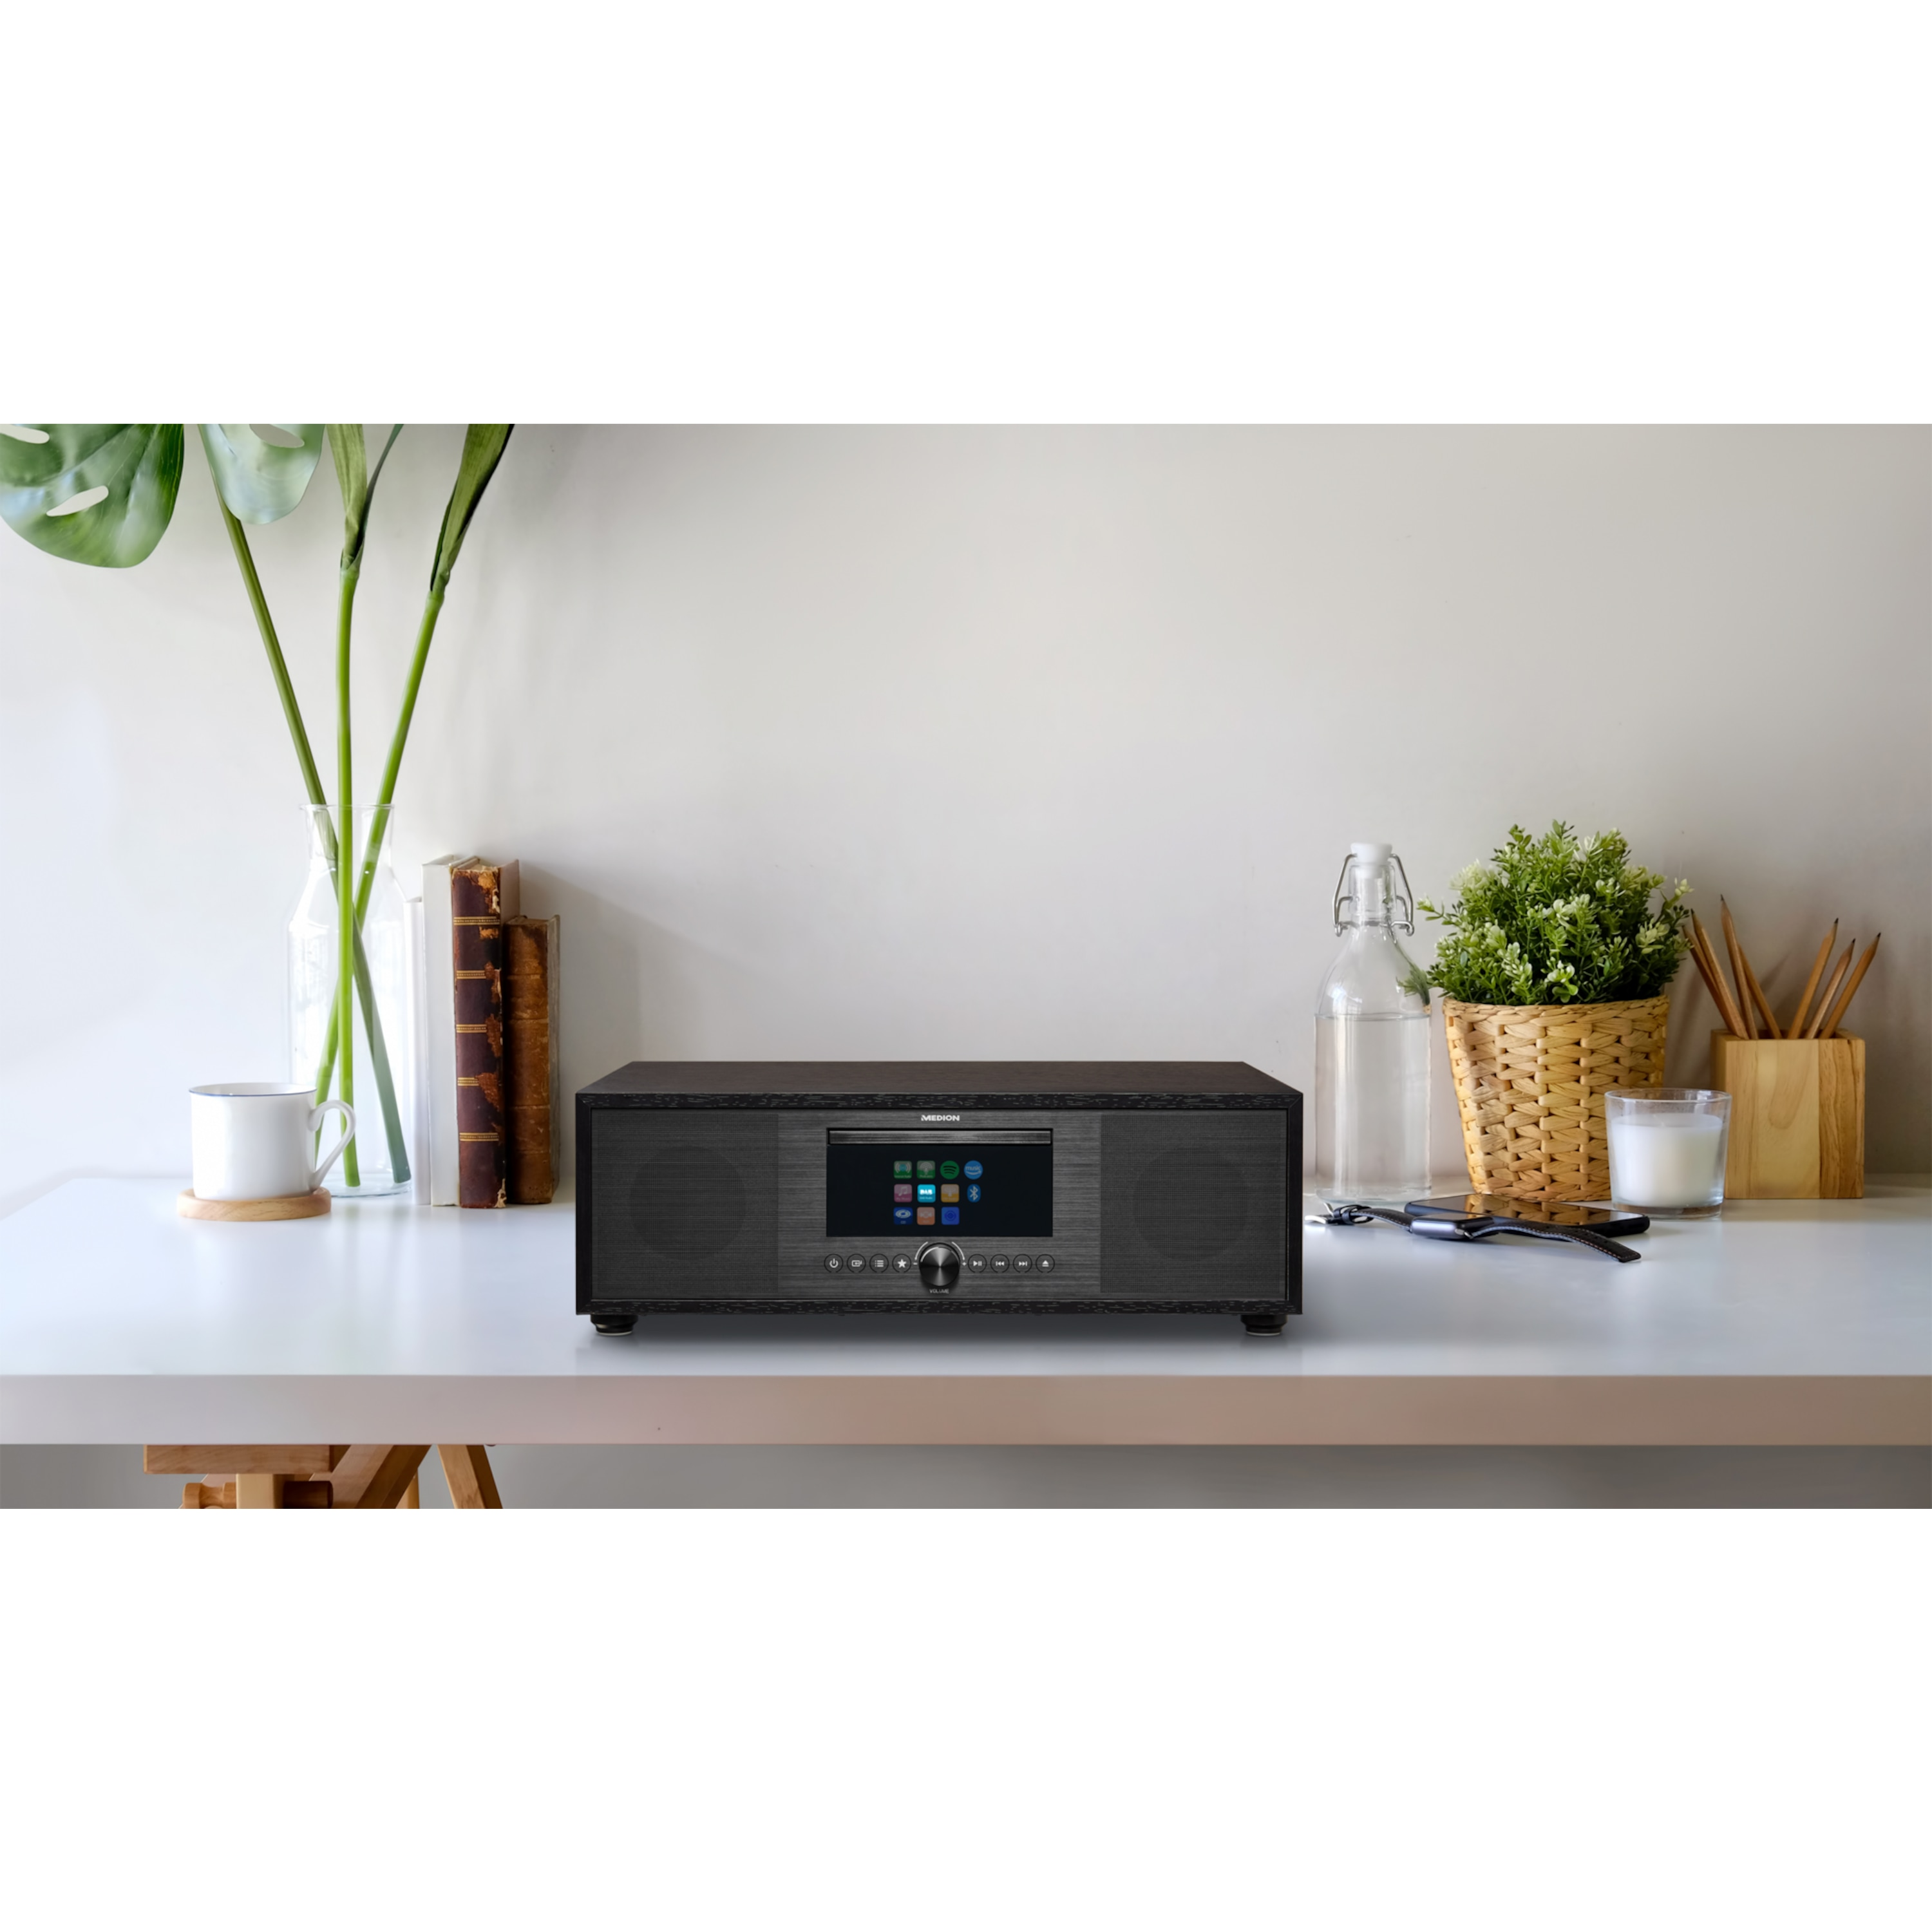 Audio Player, Radio, All-in-One System, LIFE® anthrazit KW, Internet/DAB+/PLL-UKW Internetradio, CD/MP3- MEDION WLAN Bluetooth®, P66400